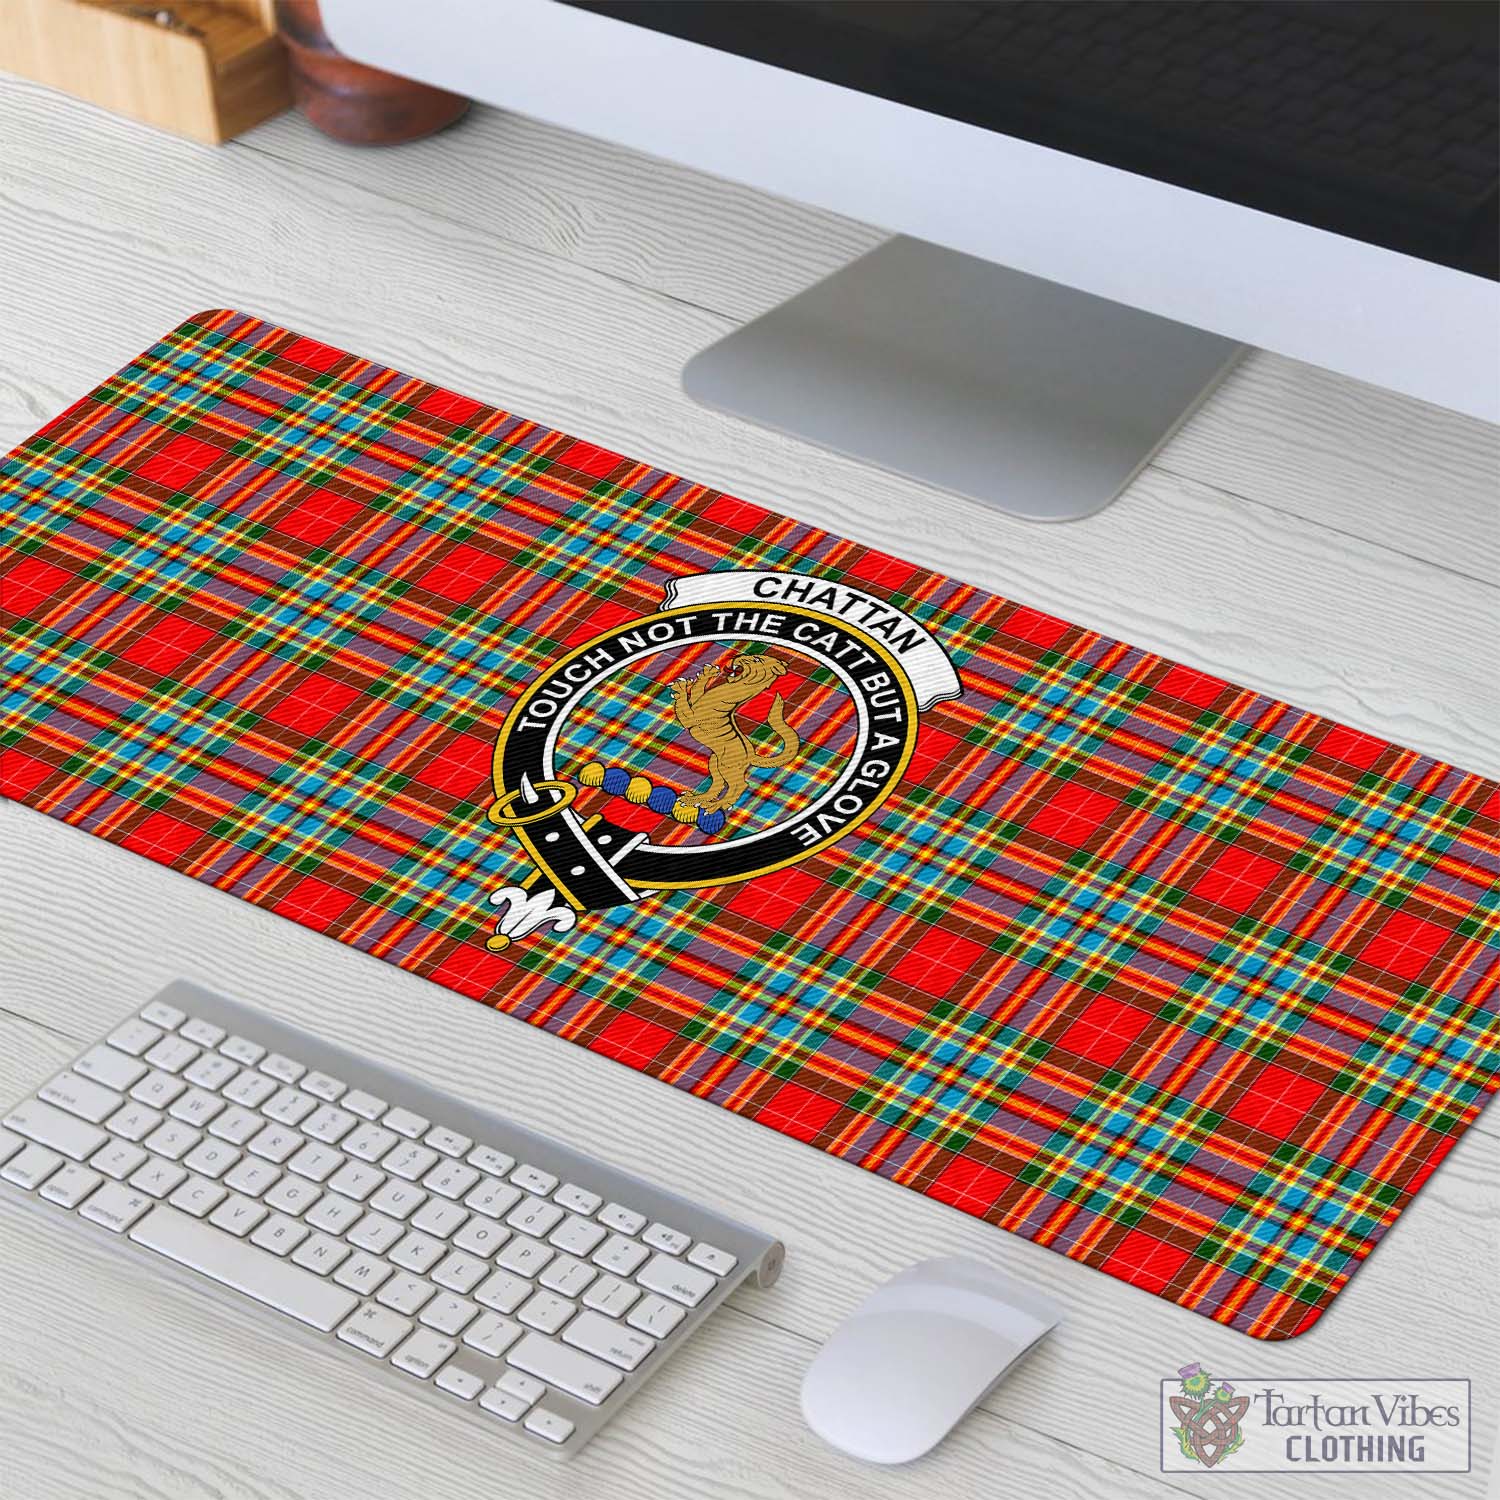 Tartan Vibes Clothing Chattan Tartan Mouse Pad with Family Crest